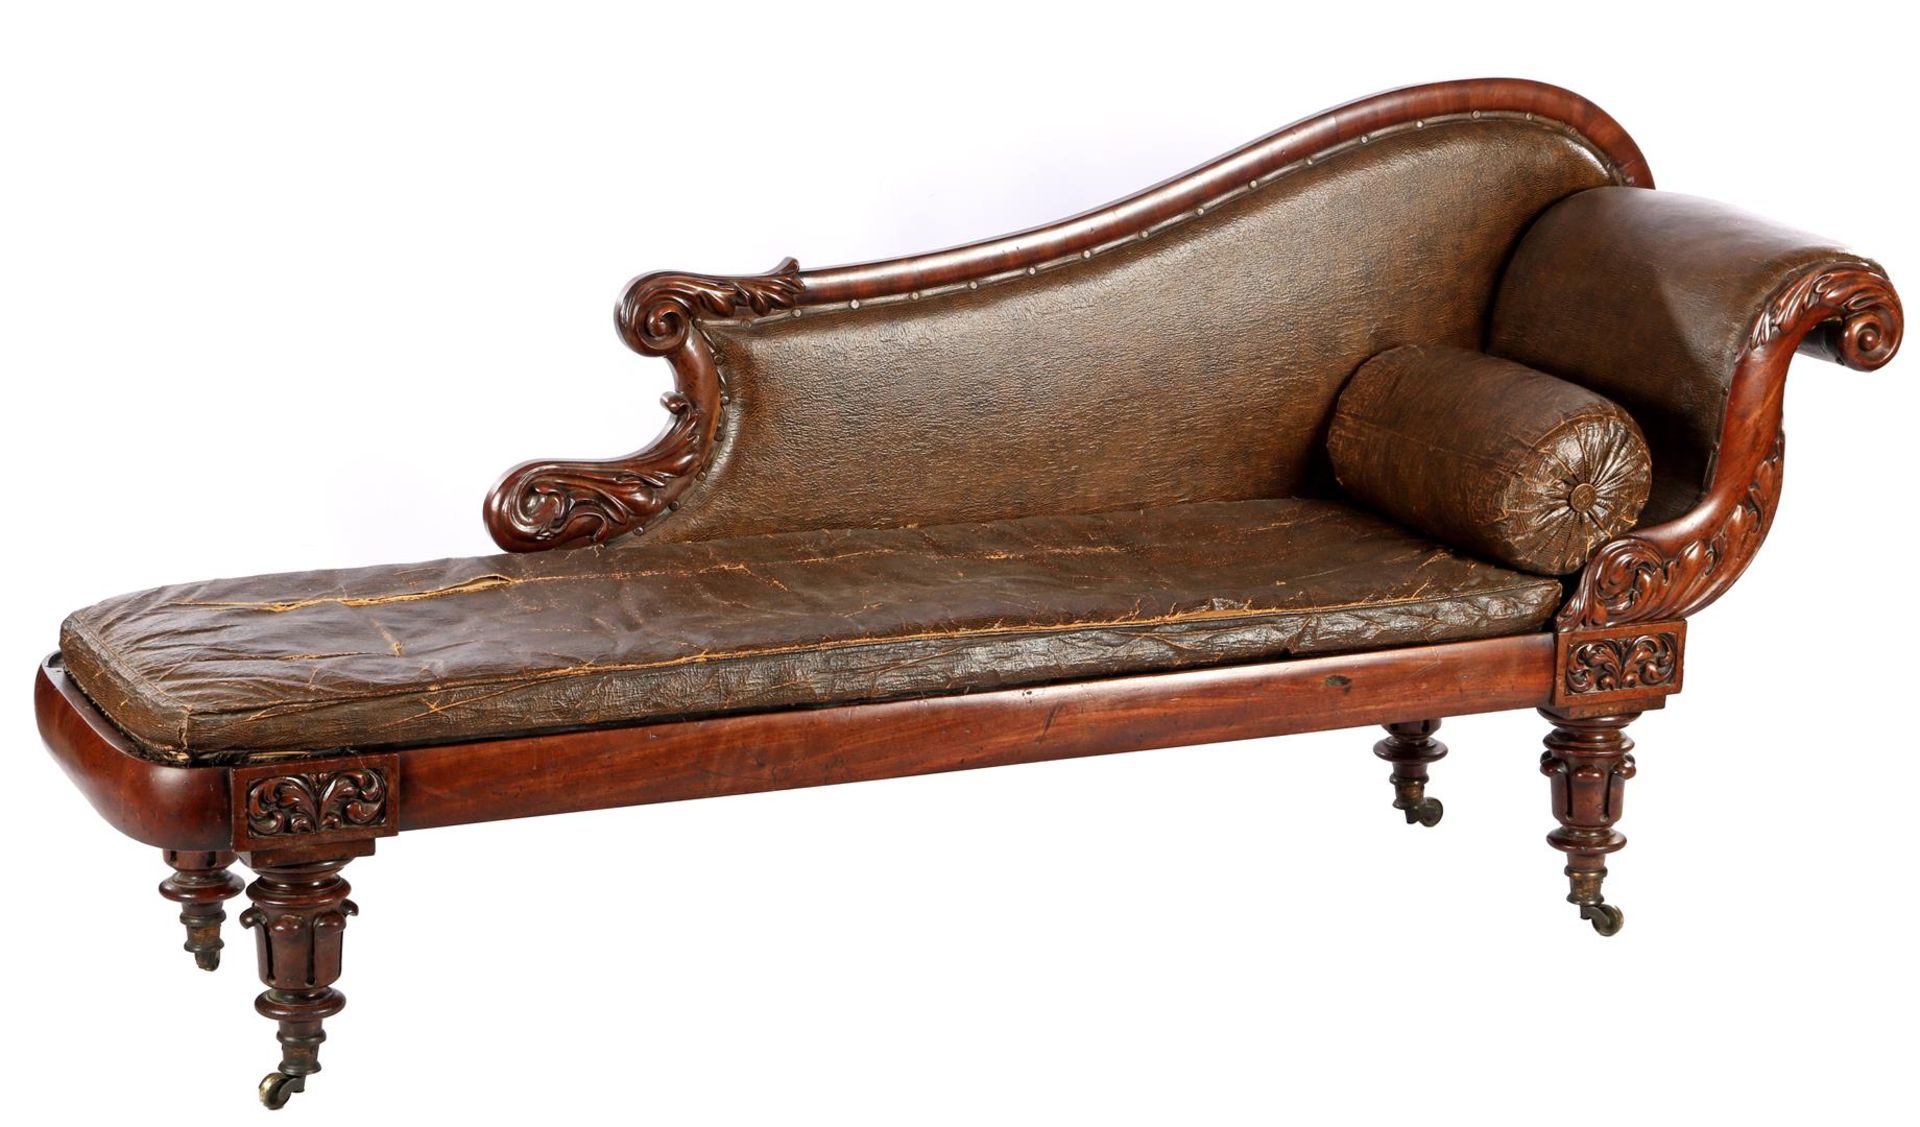 Mahogany veneer English sofa with stitching and leatherette upholstery